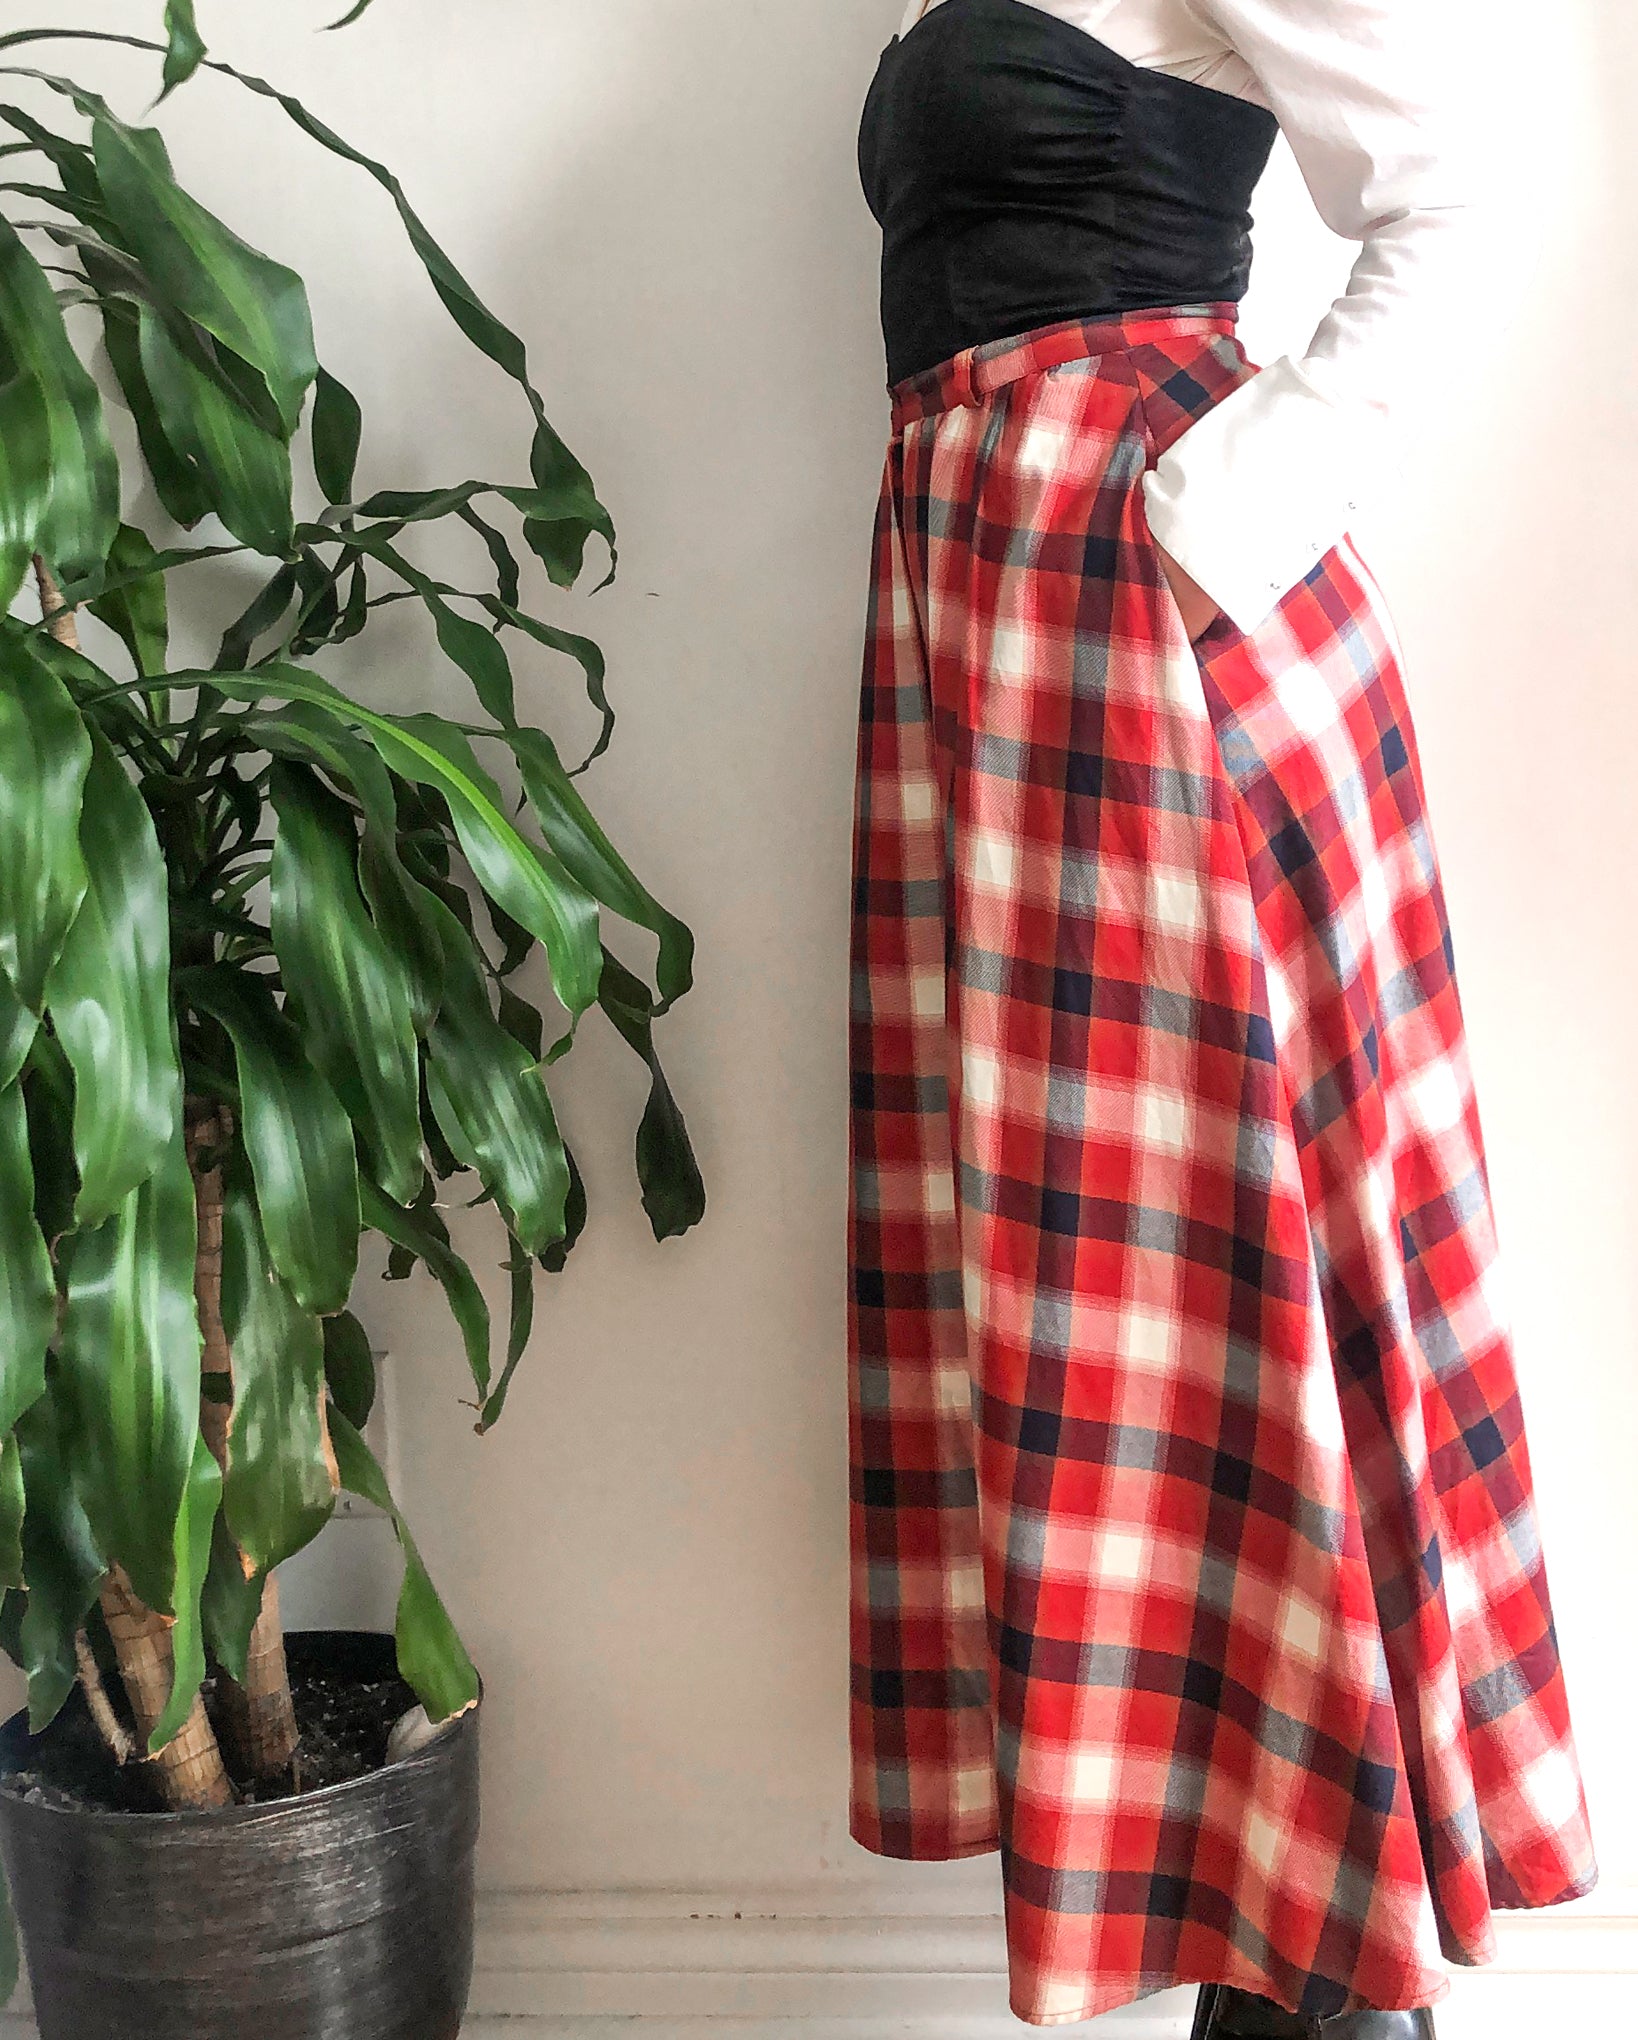 Vintage Plaid Maxi Skirt, Red Plaid Long Cotton Skirt, By JAXSPORT, Made in Hong Kong, 31 Inch Waist